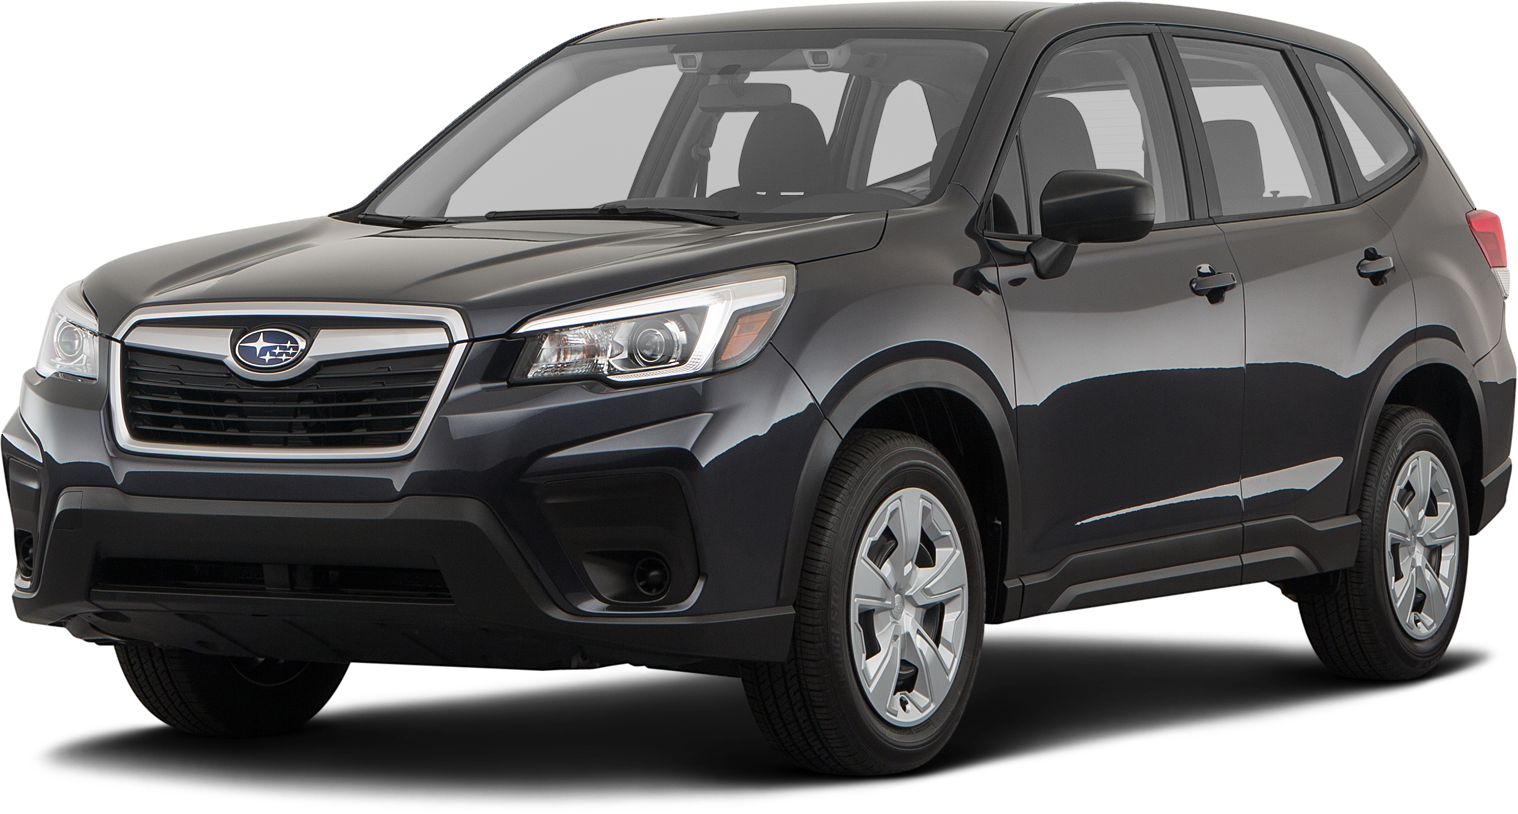 Subaru Forester Background PNG Image